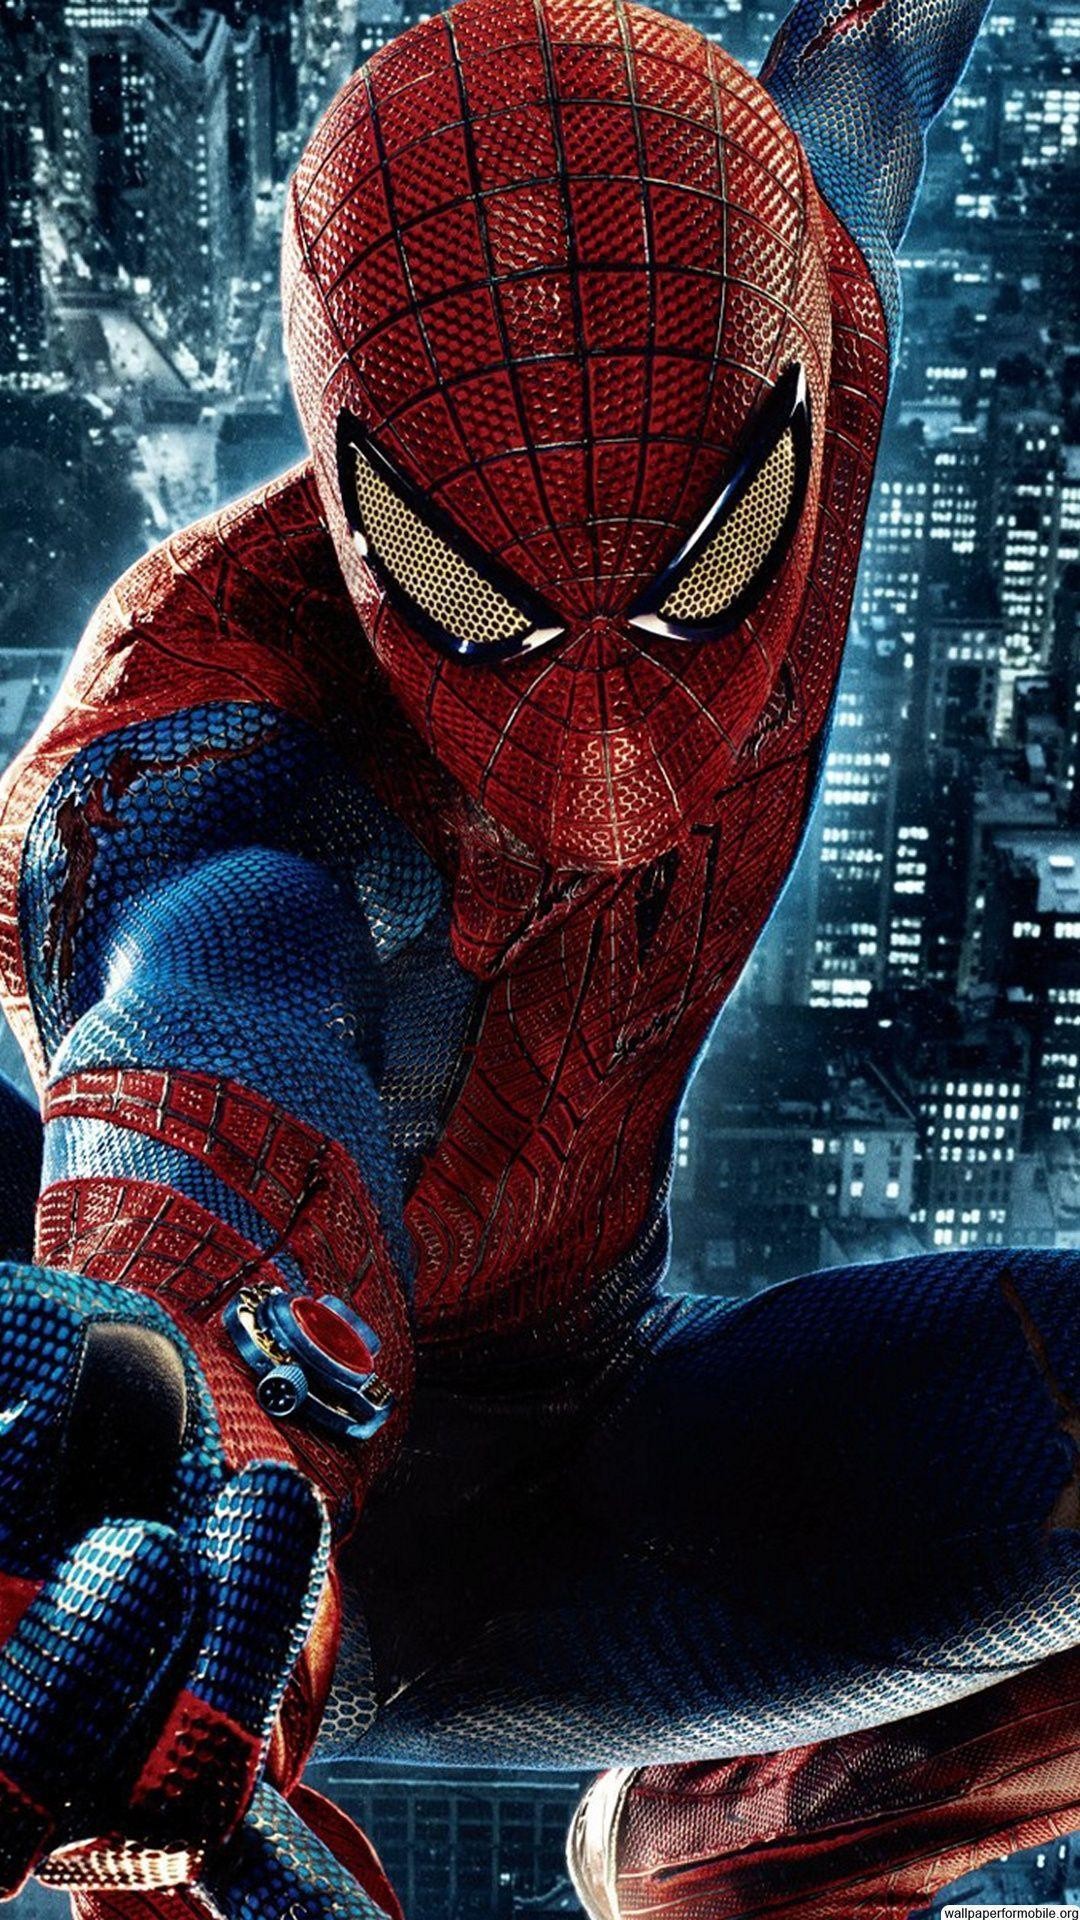 1080x1920 The Amazing Spiderman Wallpapers Hd | Wallpaper for Mobile